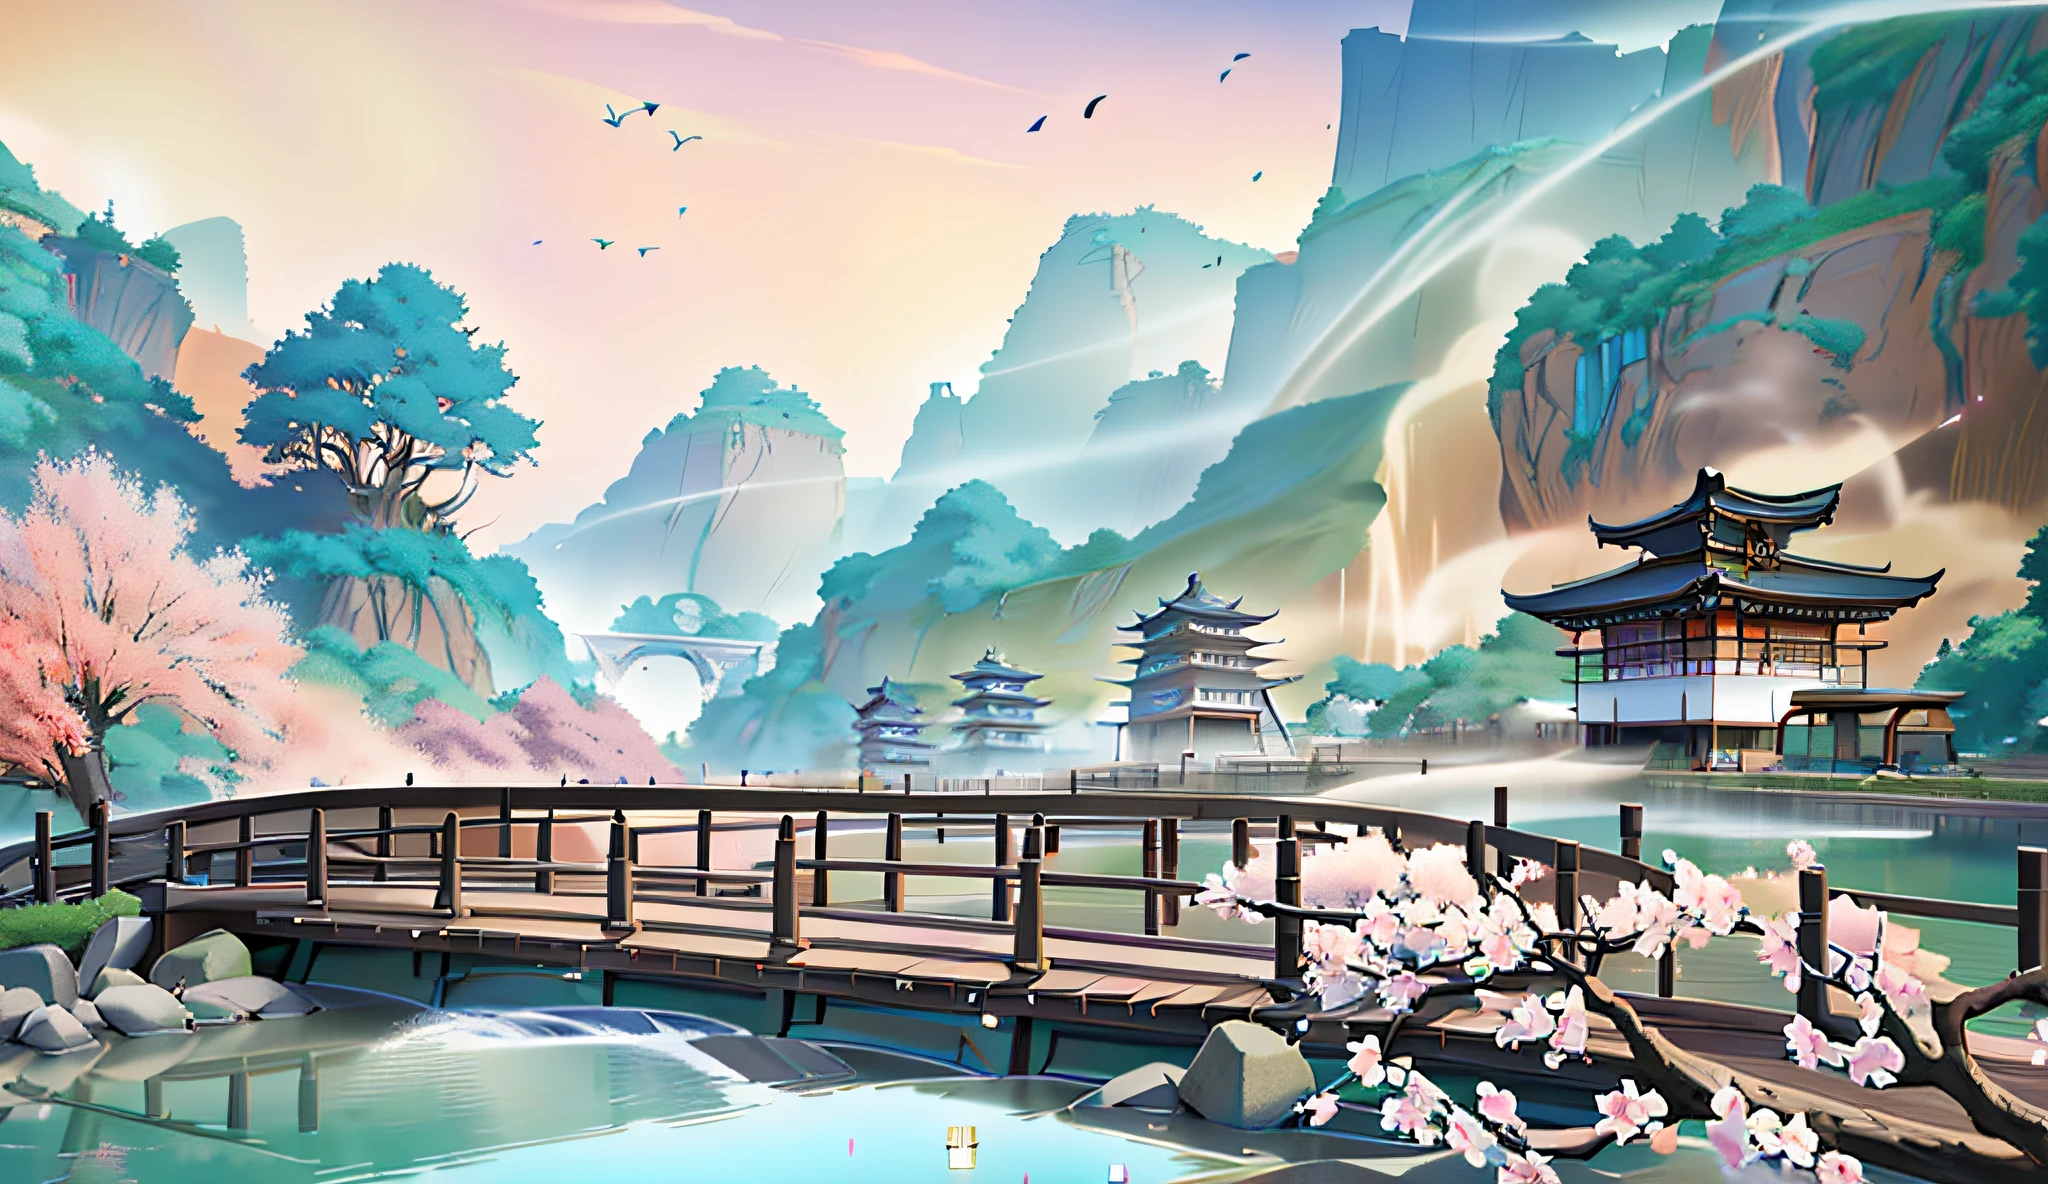 Painting of a bridge over the river，In the background is a pagoda, Beautiful art UHD 4 K, Detailed painting 4 K, landscape artwork, anime landscape wallpapers, Anime landscape, anime beautiful peace scene, scenery art detailed, Anime art wallpaper 4k, digital painting of a pagoda, Anime art wallpaper 4 K, Anime background art, Anime art wallpaper 8 K